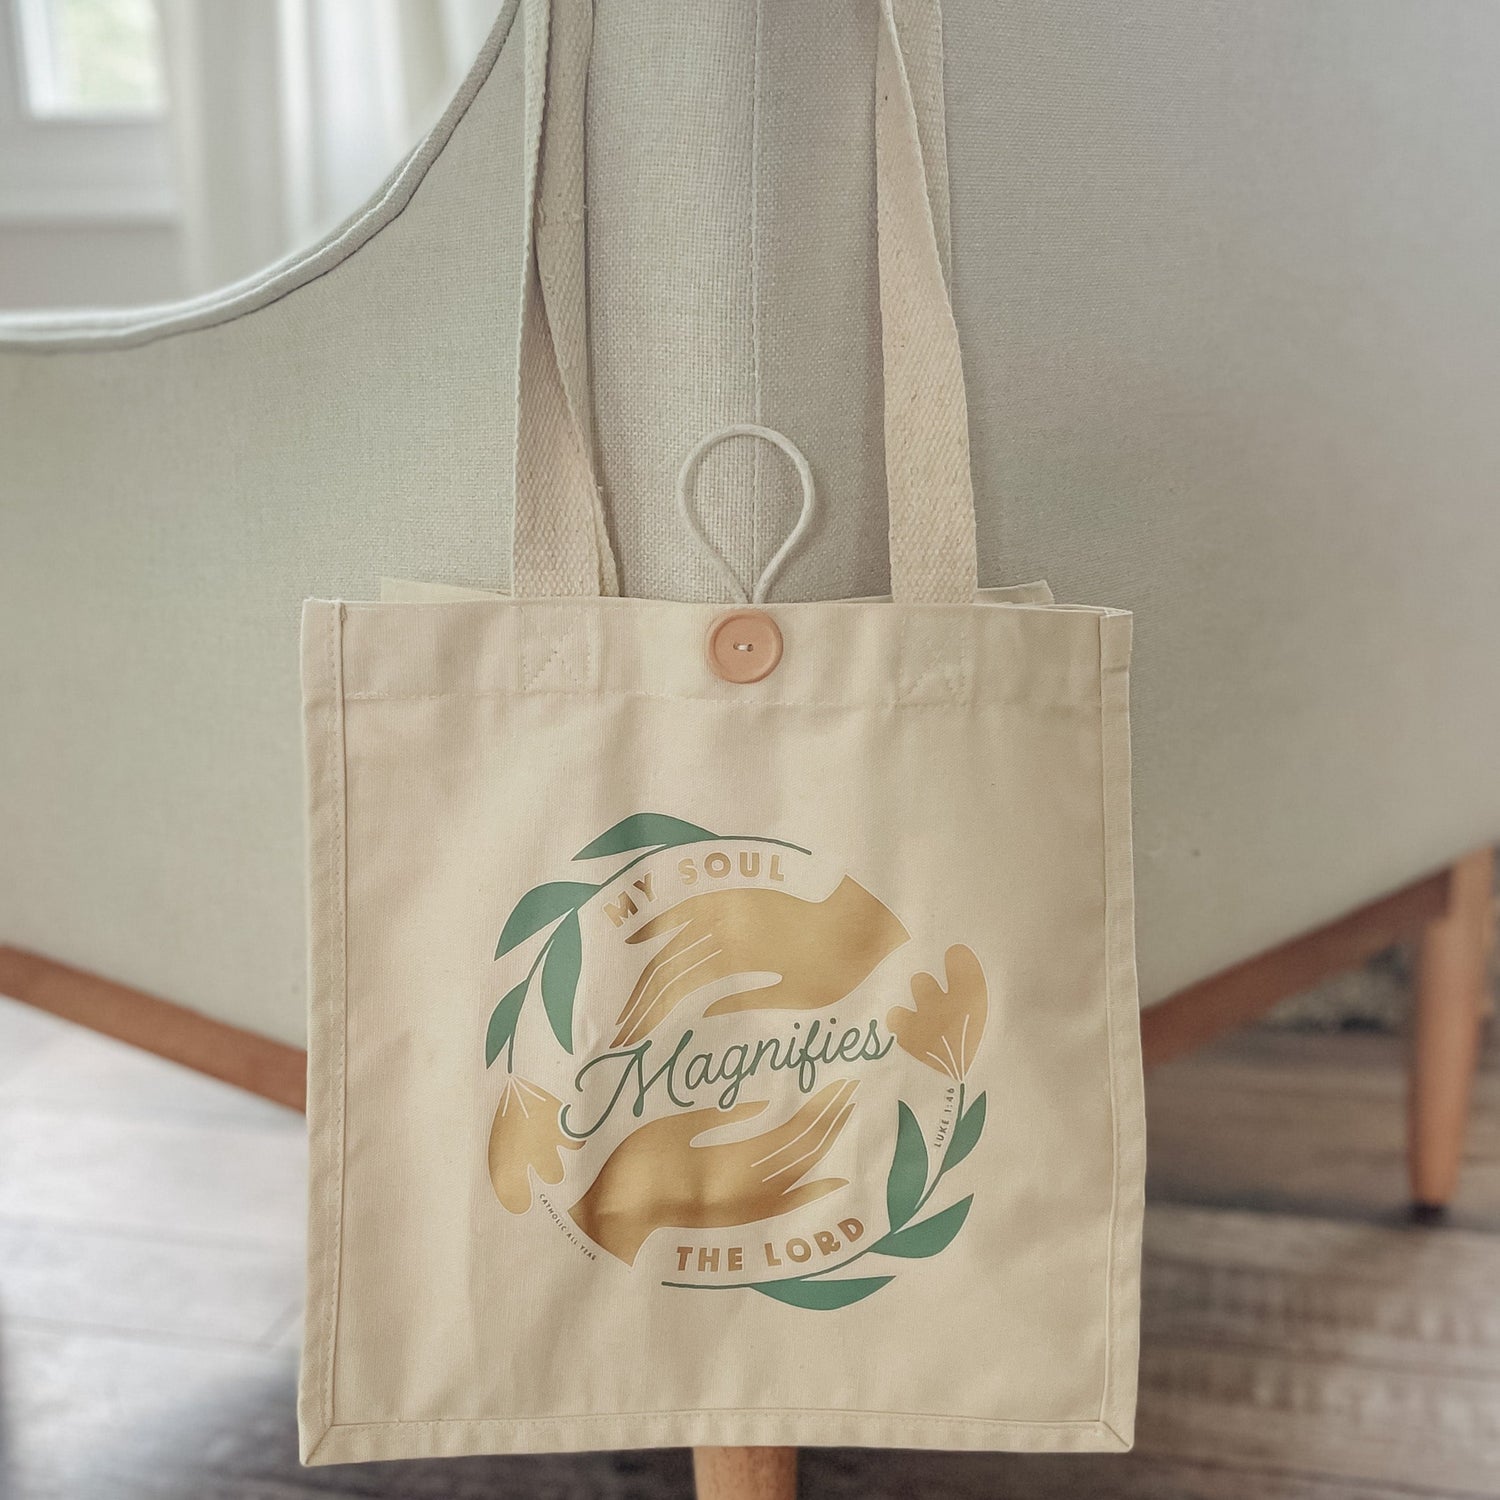 &quot;My Soul Magnifies the Lord&quot; Tote Bag